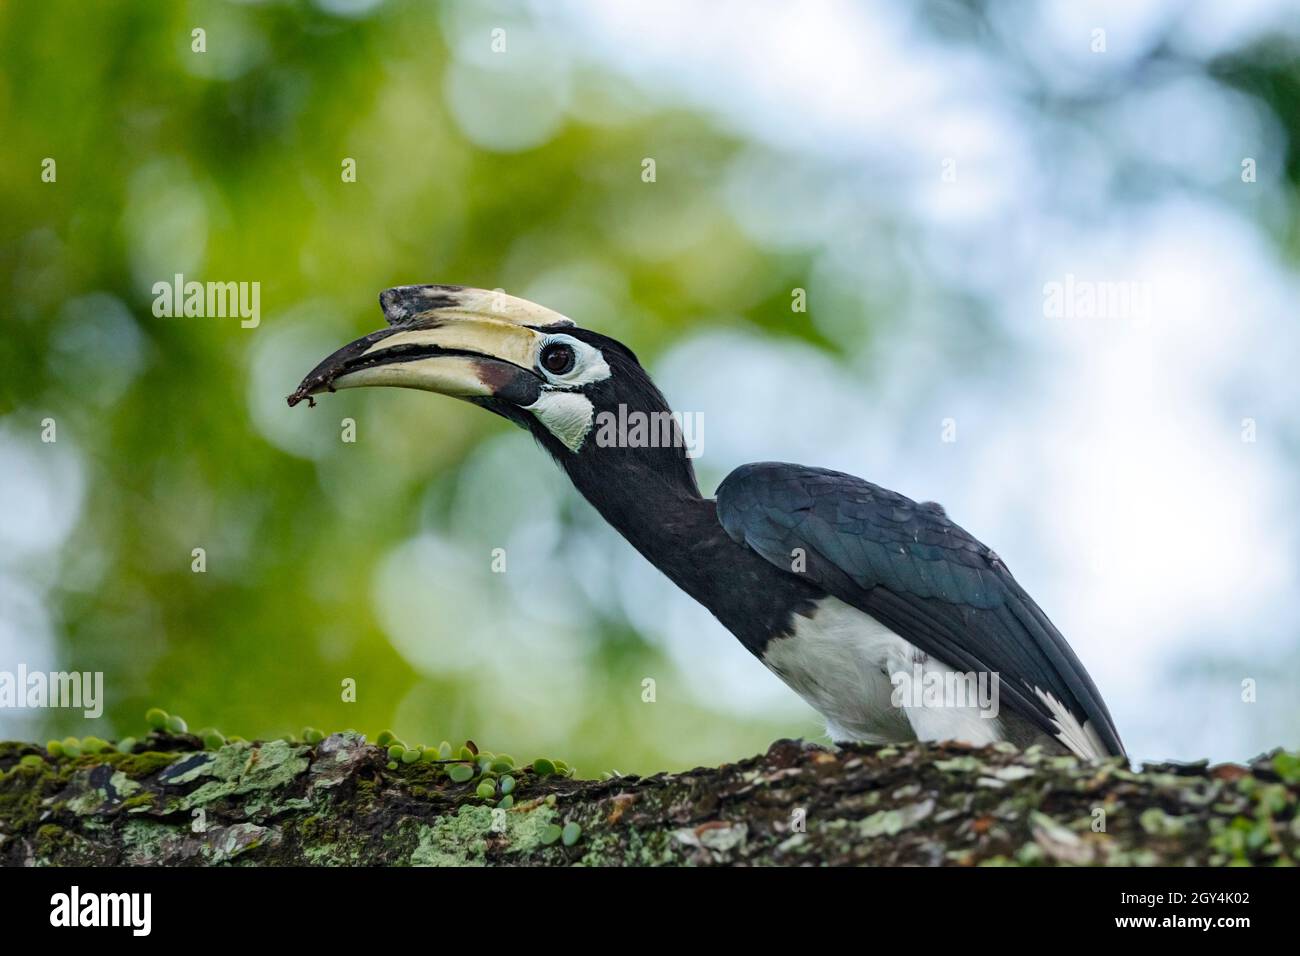 Oriental Pied Hornbill tossing a gecko down its mouth, Singapore Stock Photo